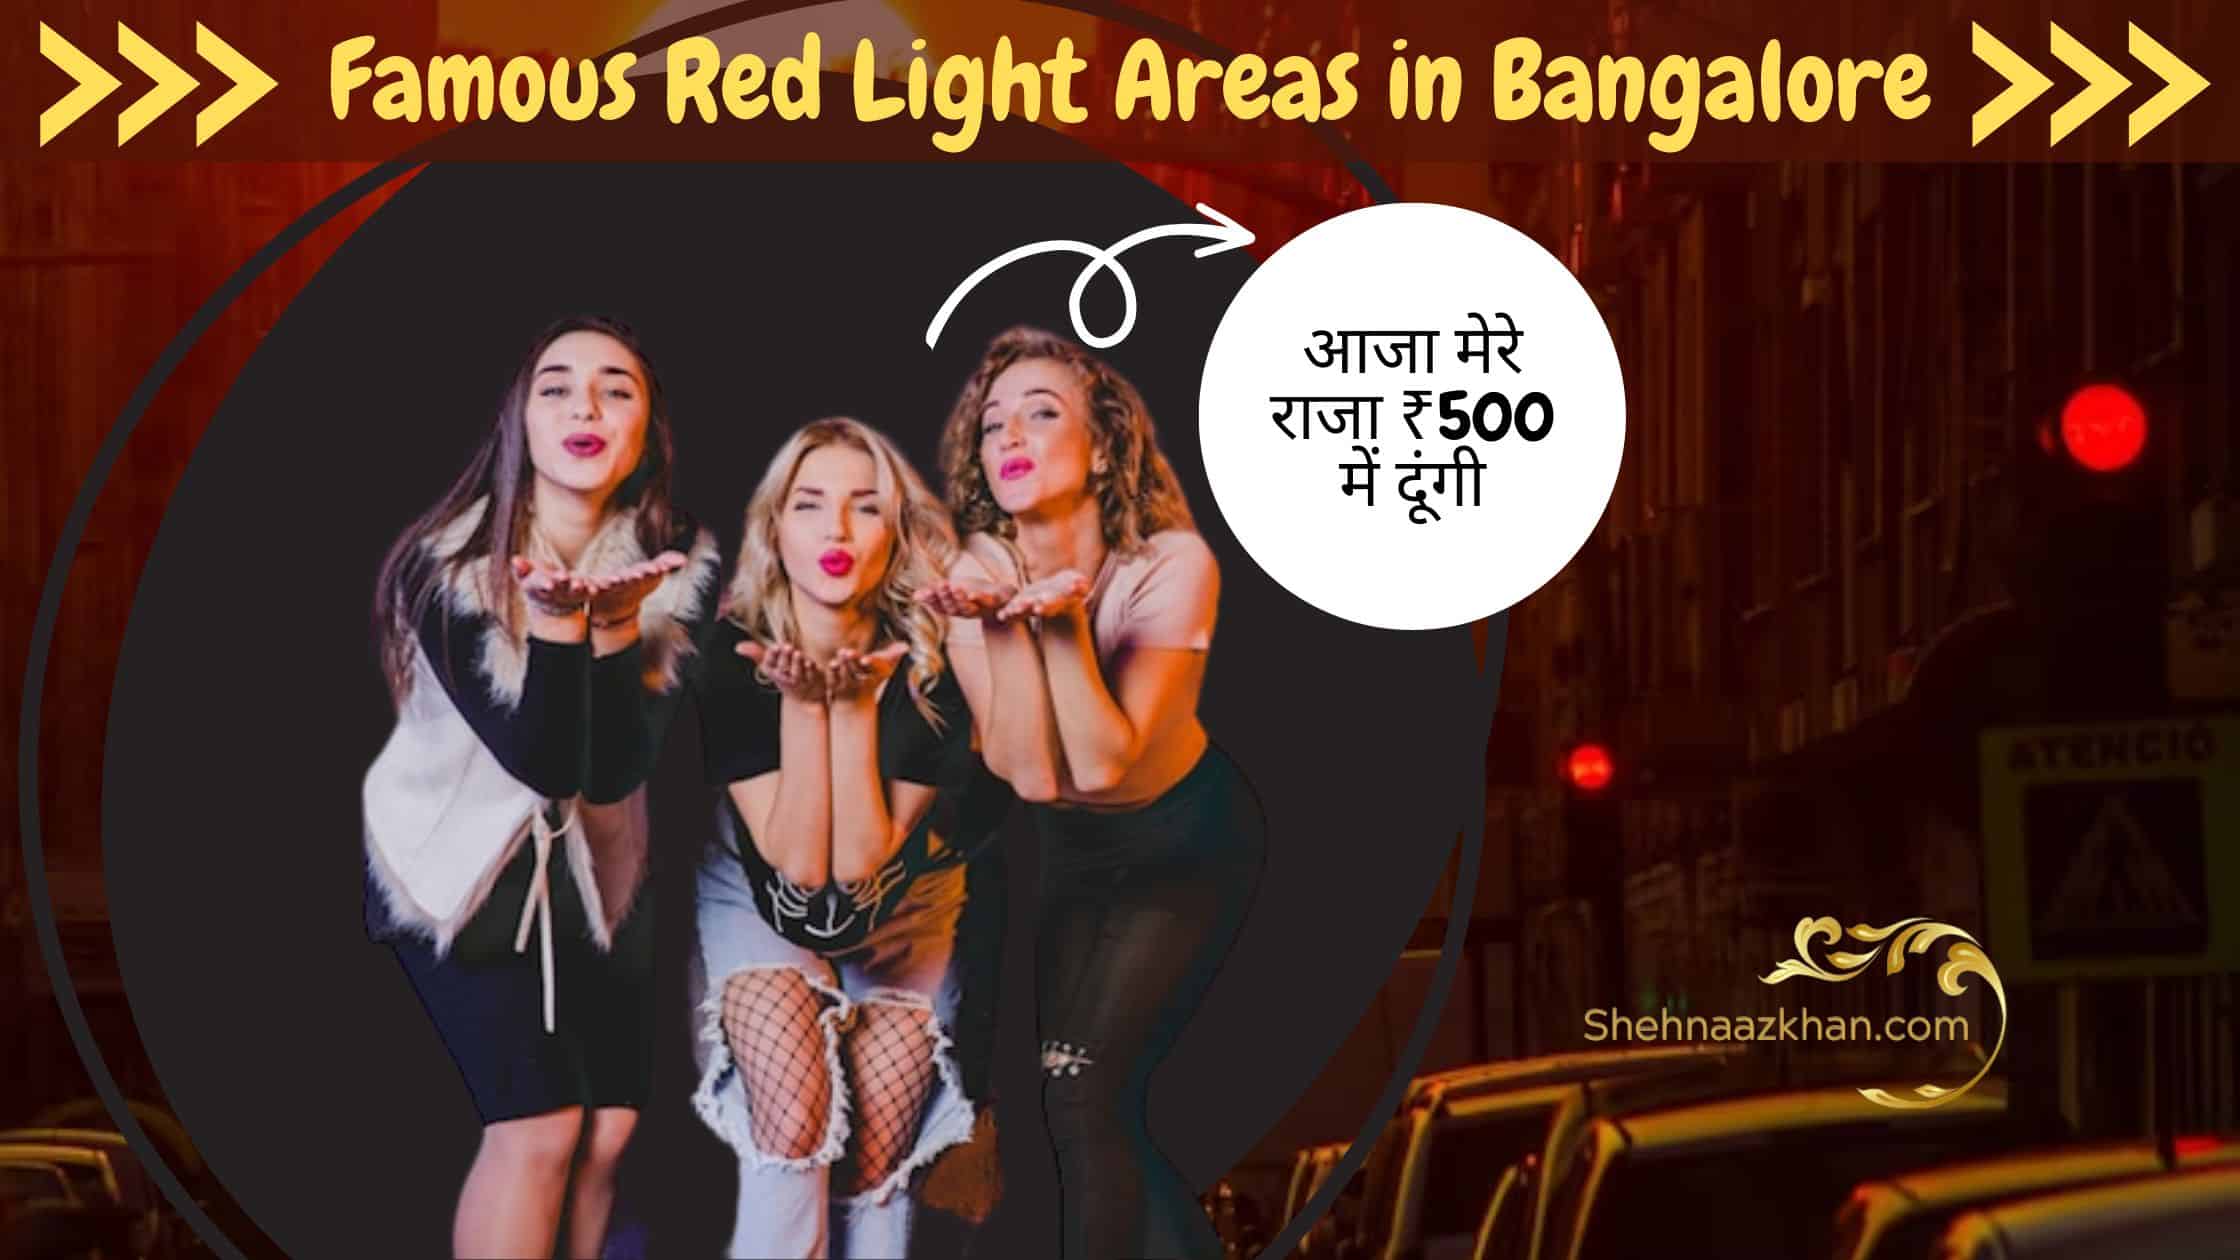 Famous Red Light Areas in Bangalore